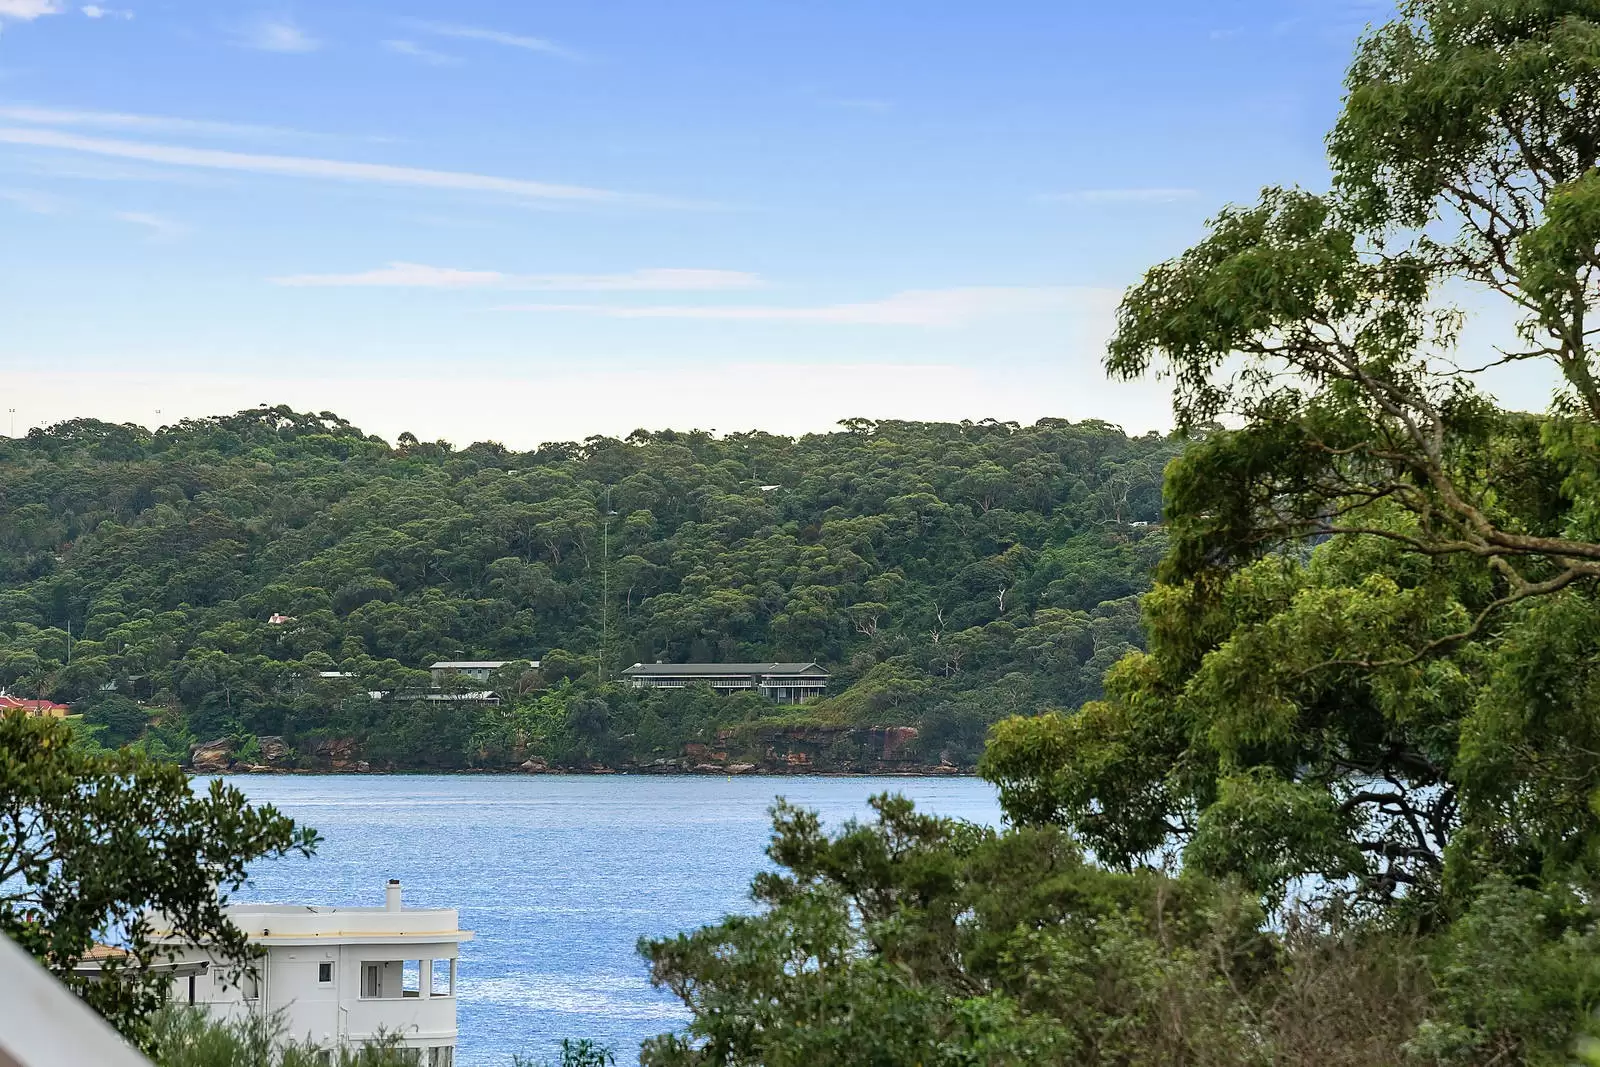 Photo #3: 12 The Crescent, Vaucluse - Sold by Sydney Sotheby's International Realty